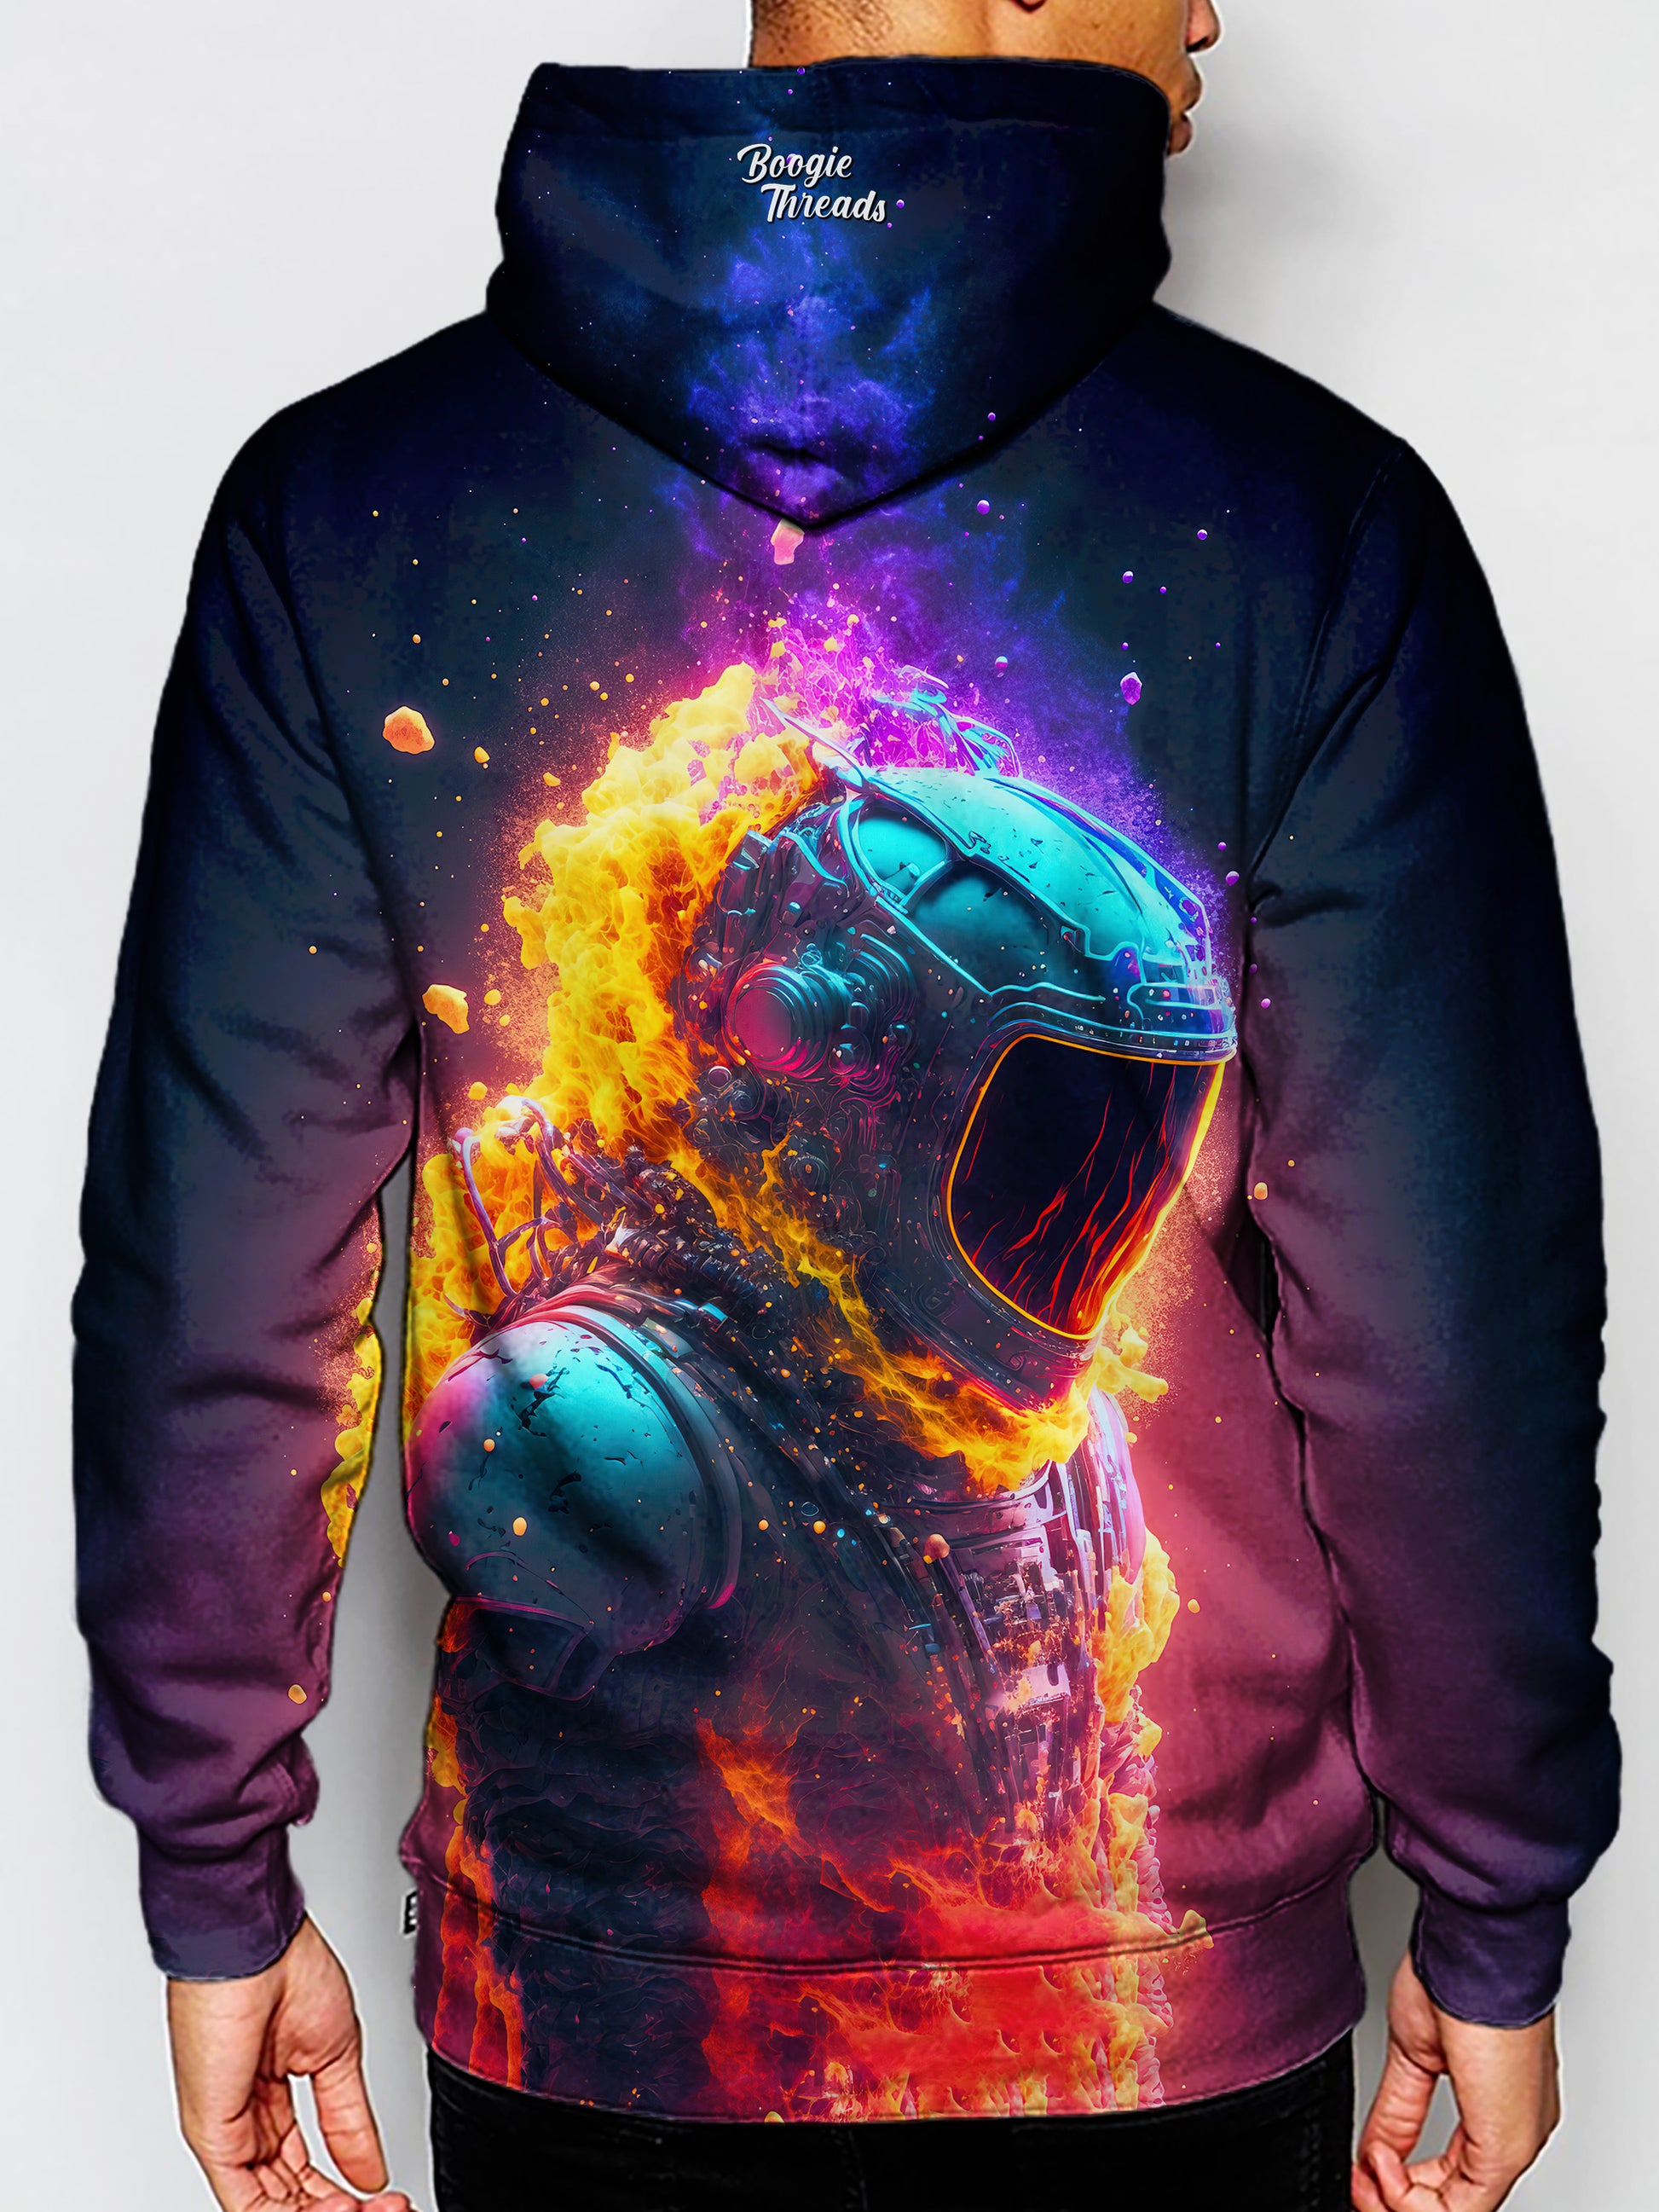 Stay comfy and stylish all night long with this pullover hoodie